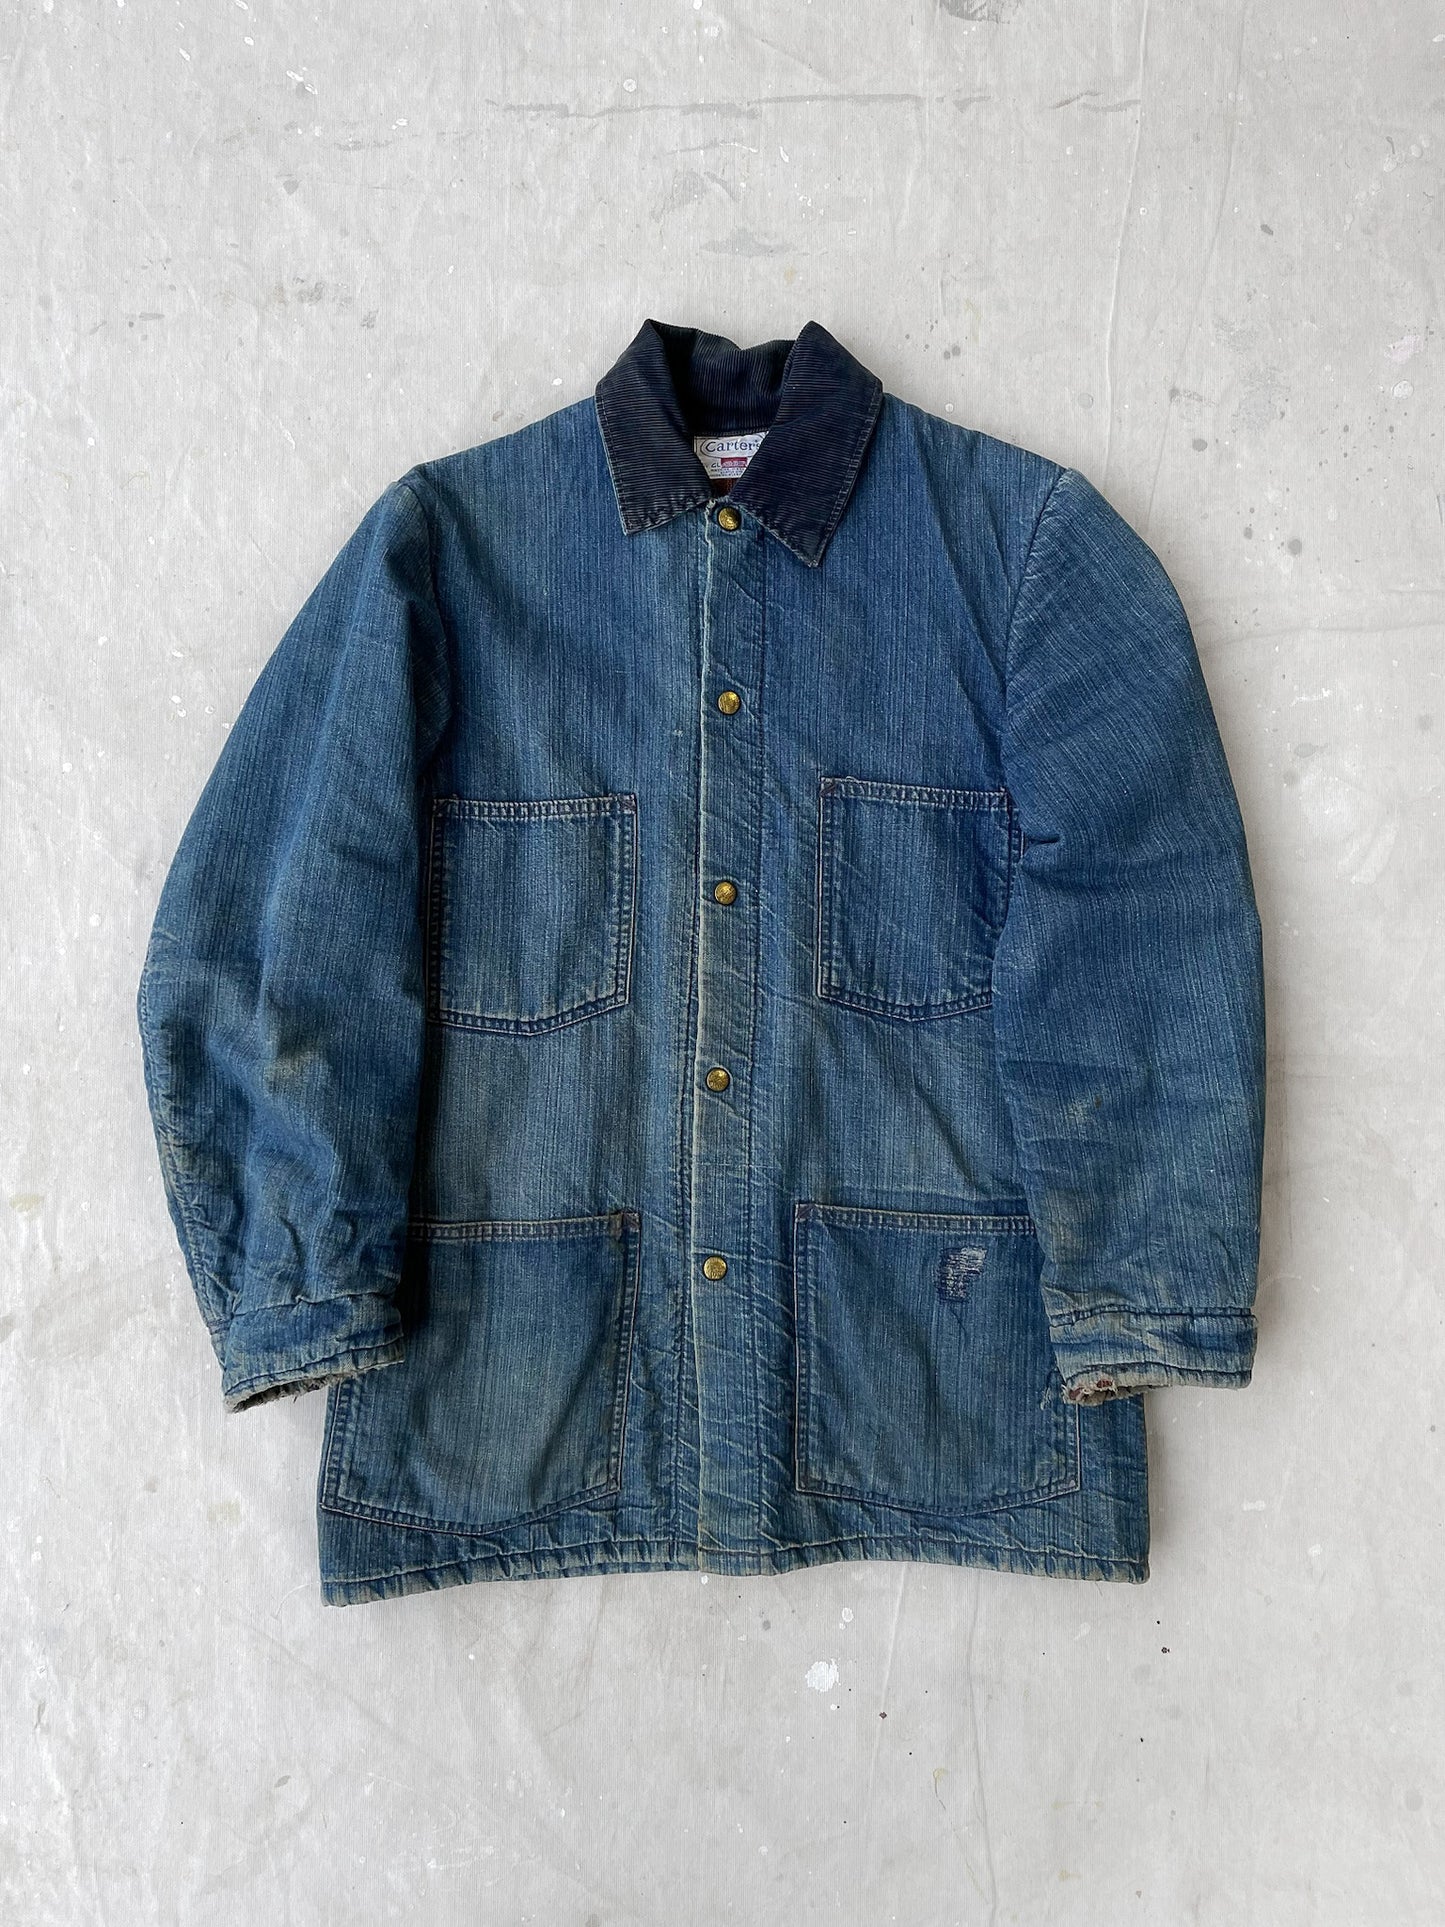 Carters Blanked Lined Denim Chore Coat—[M]